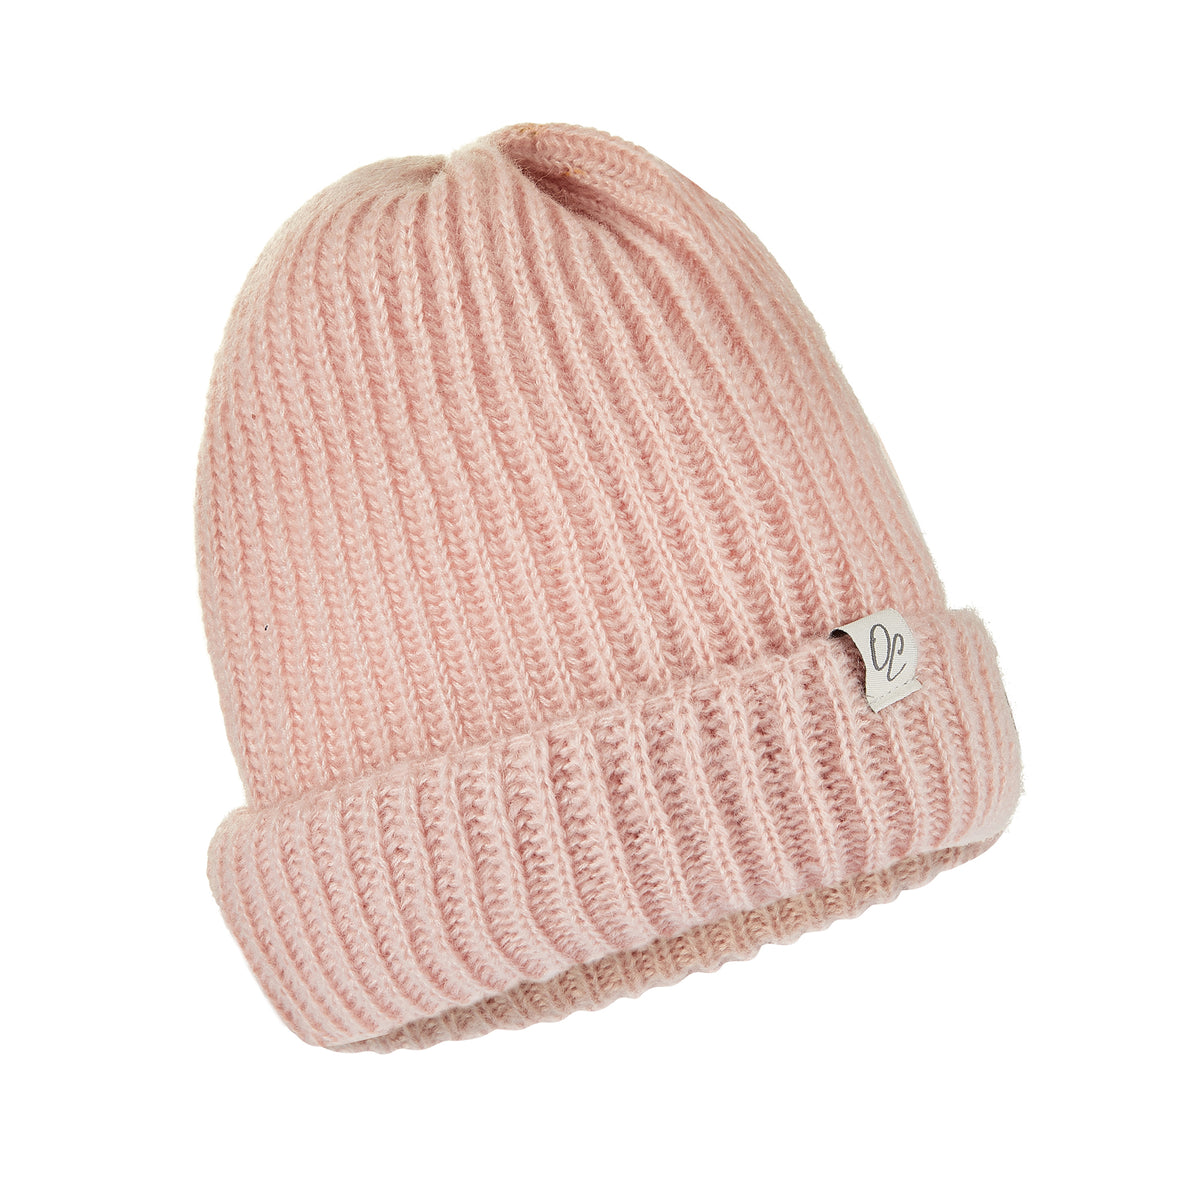 Only Curls Satin Lined Pink Knitted Beanie Hat